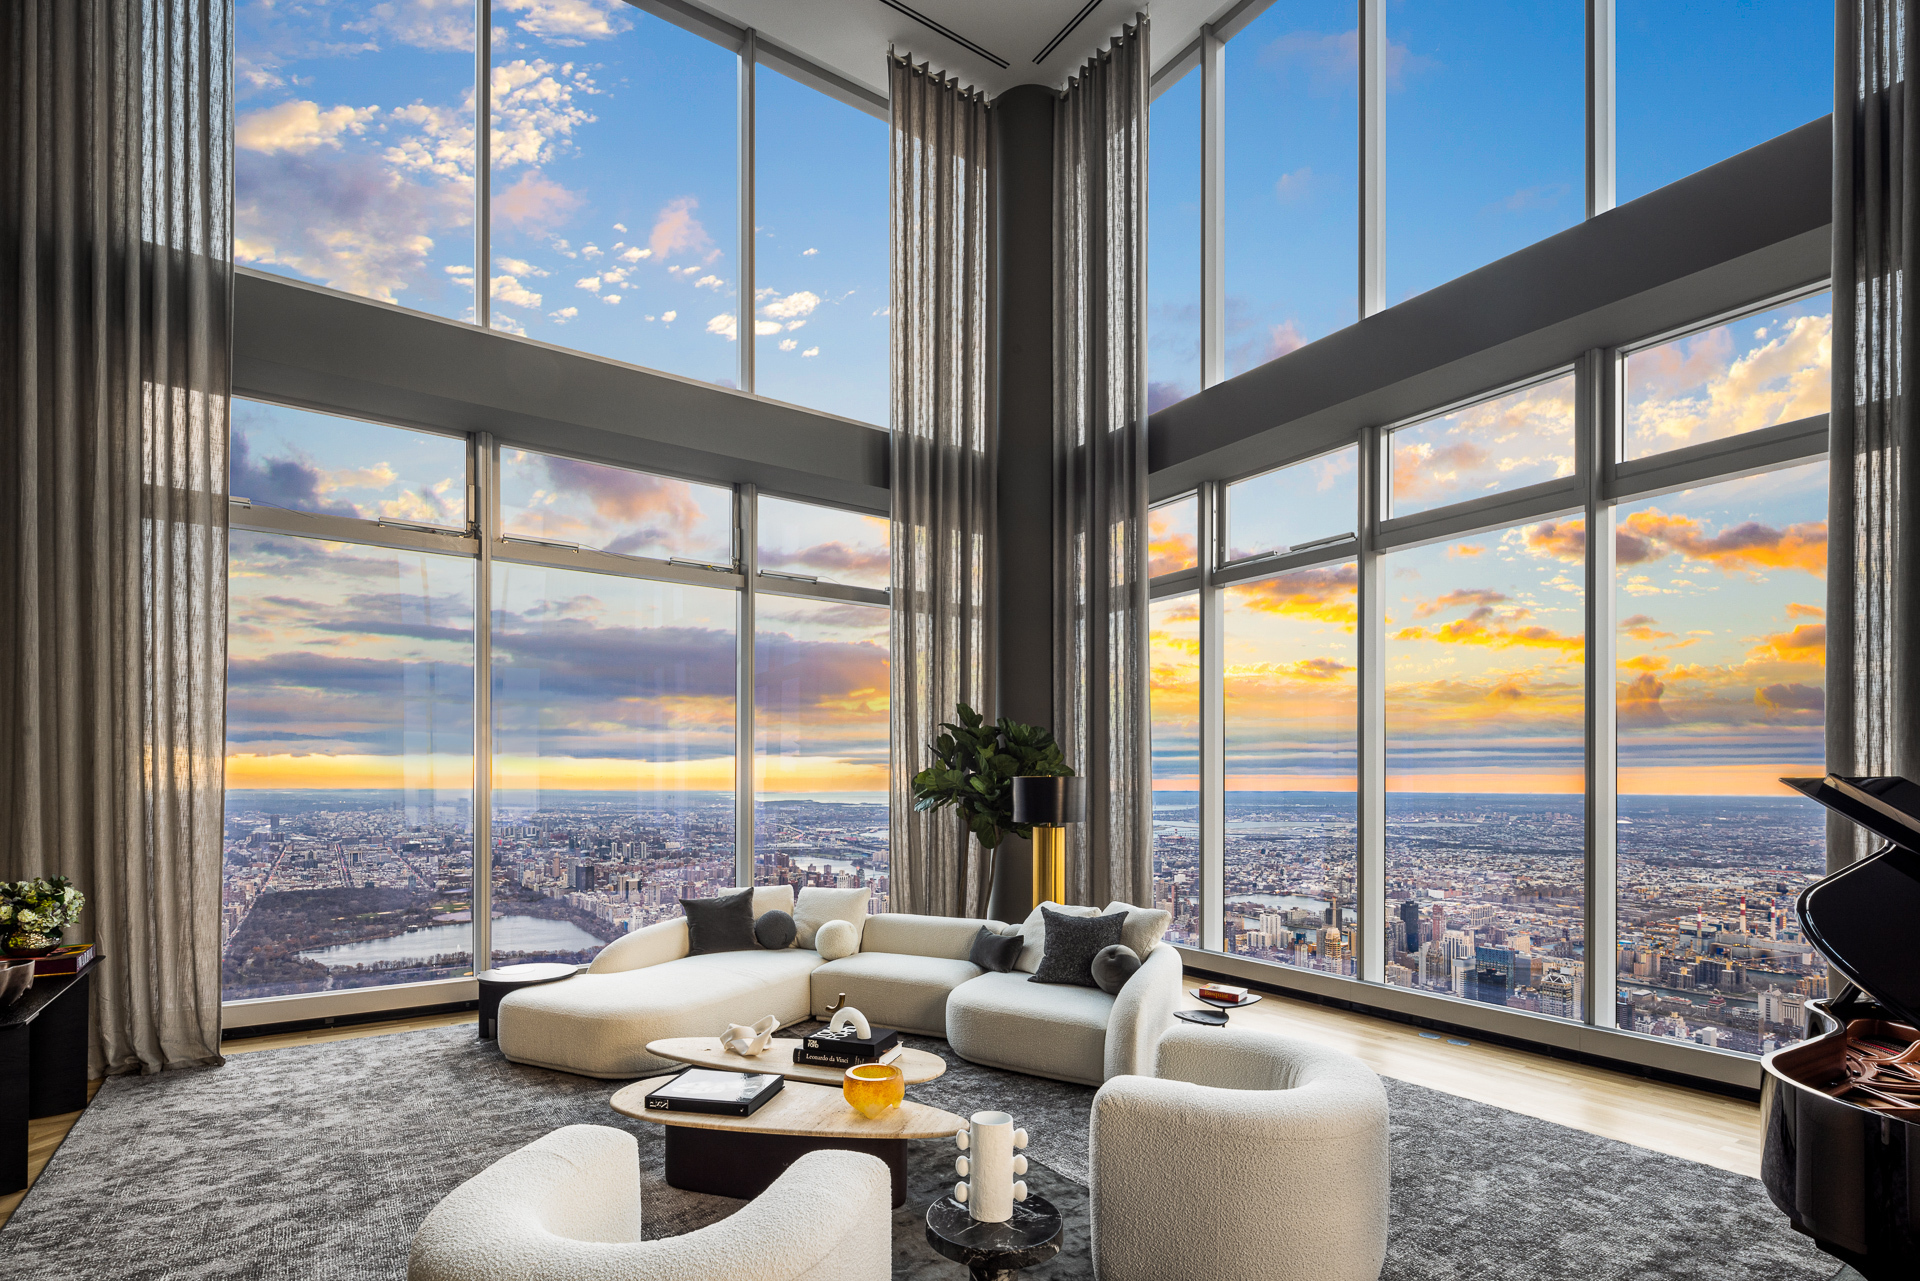 NYC 'billionaires row' penthouse, world's highest residence, listed for  $250M